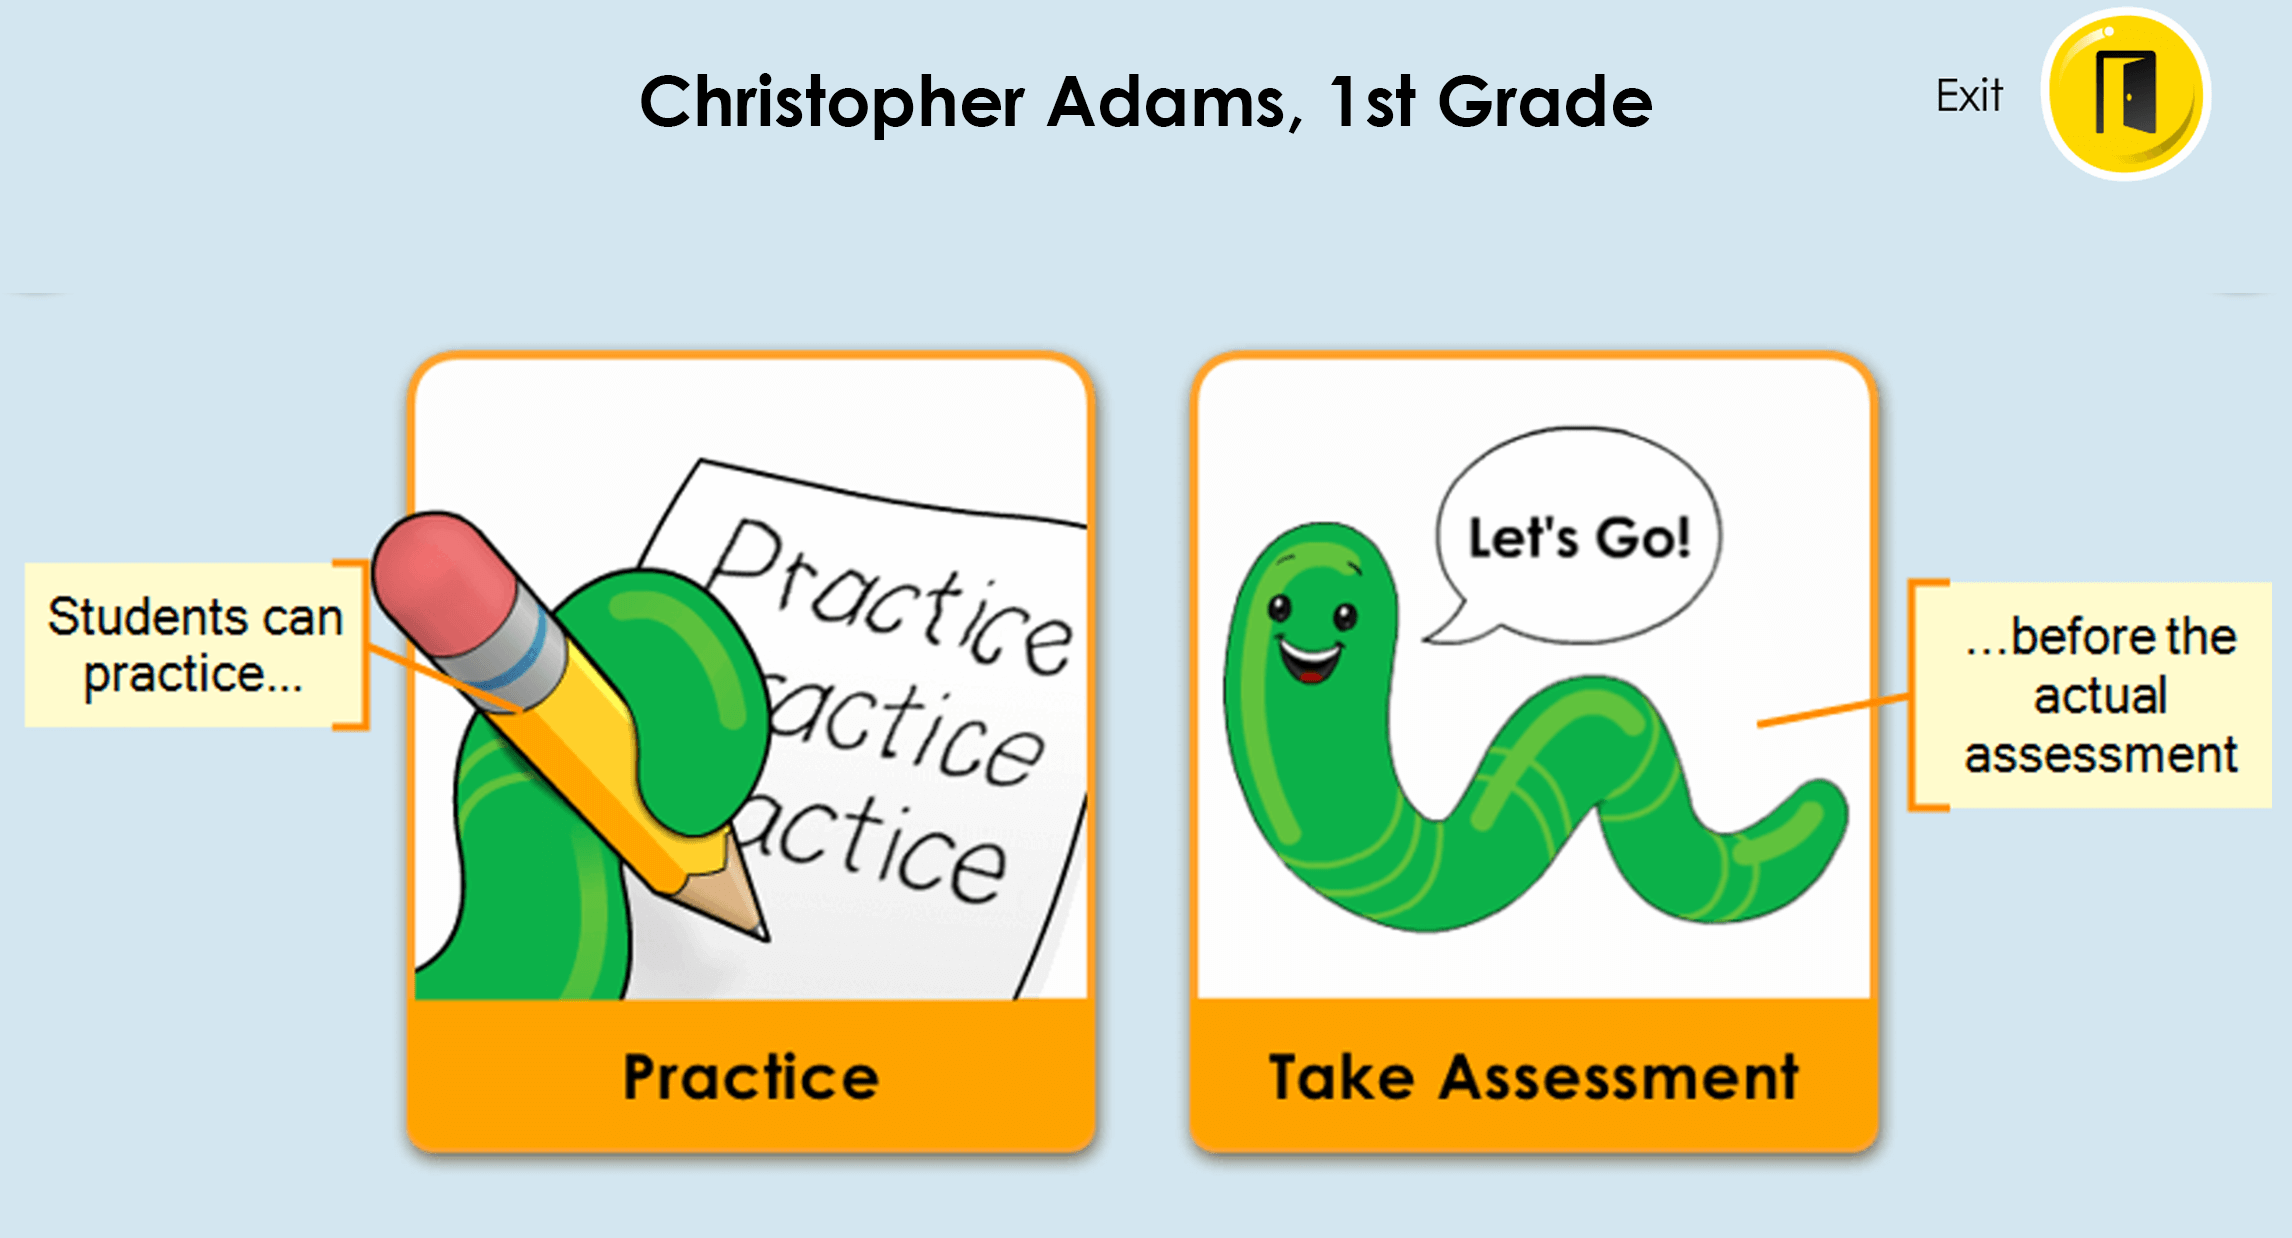 Student choices to begin practice or to take assessment.